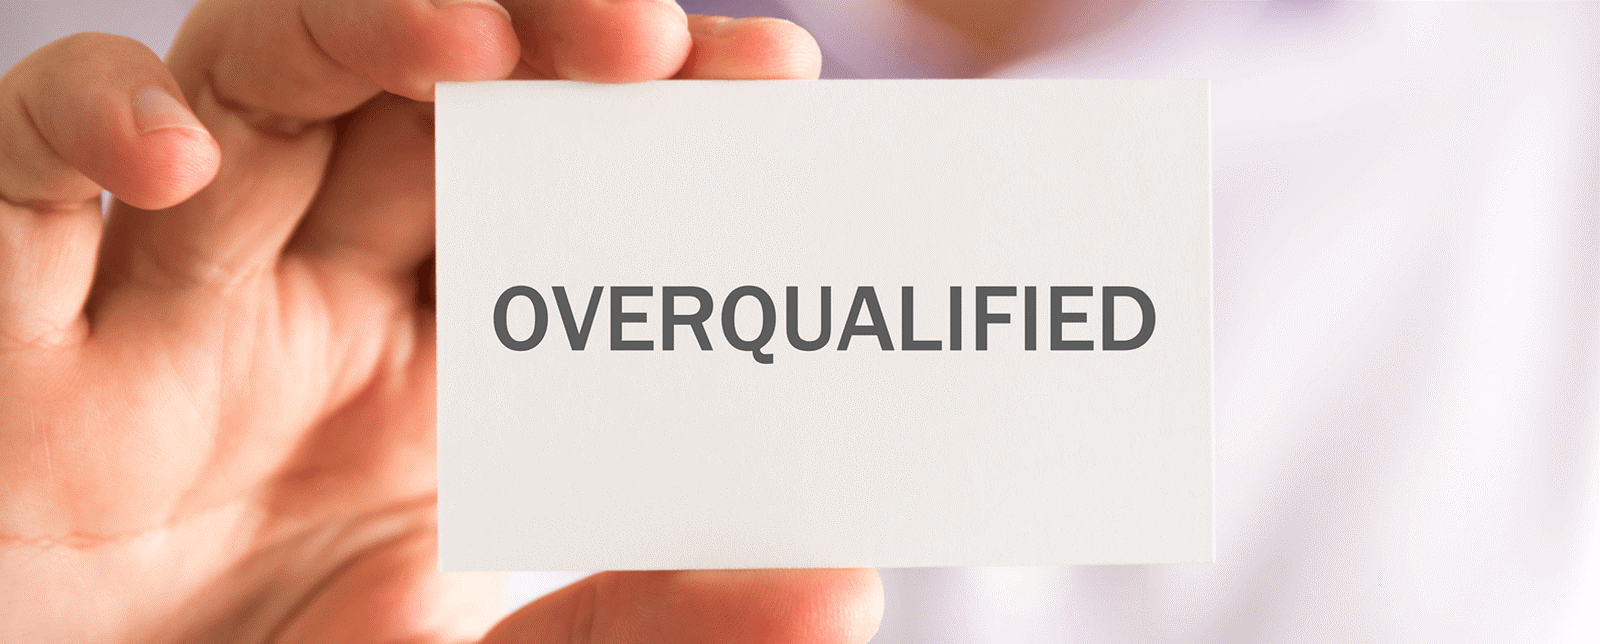 Handling the "Overqualified" Excuse